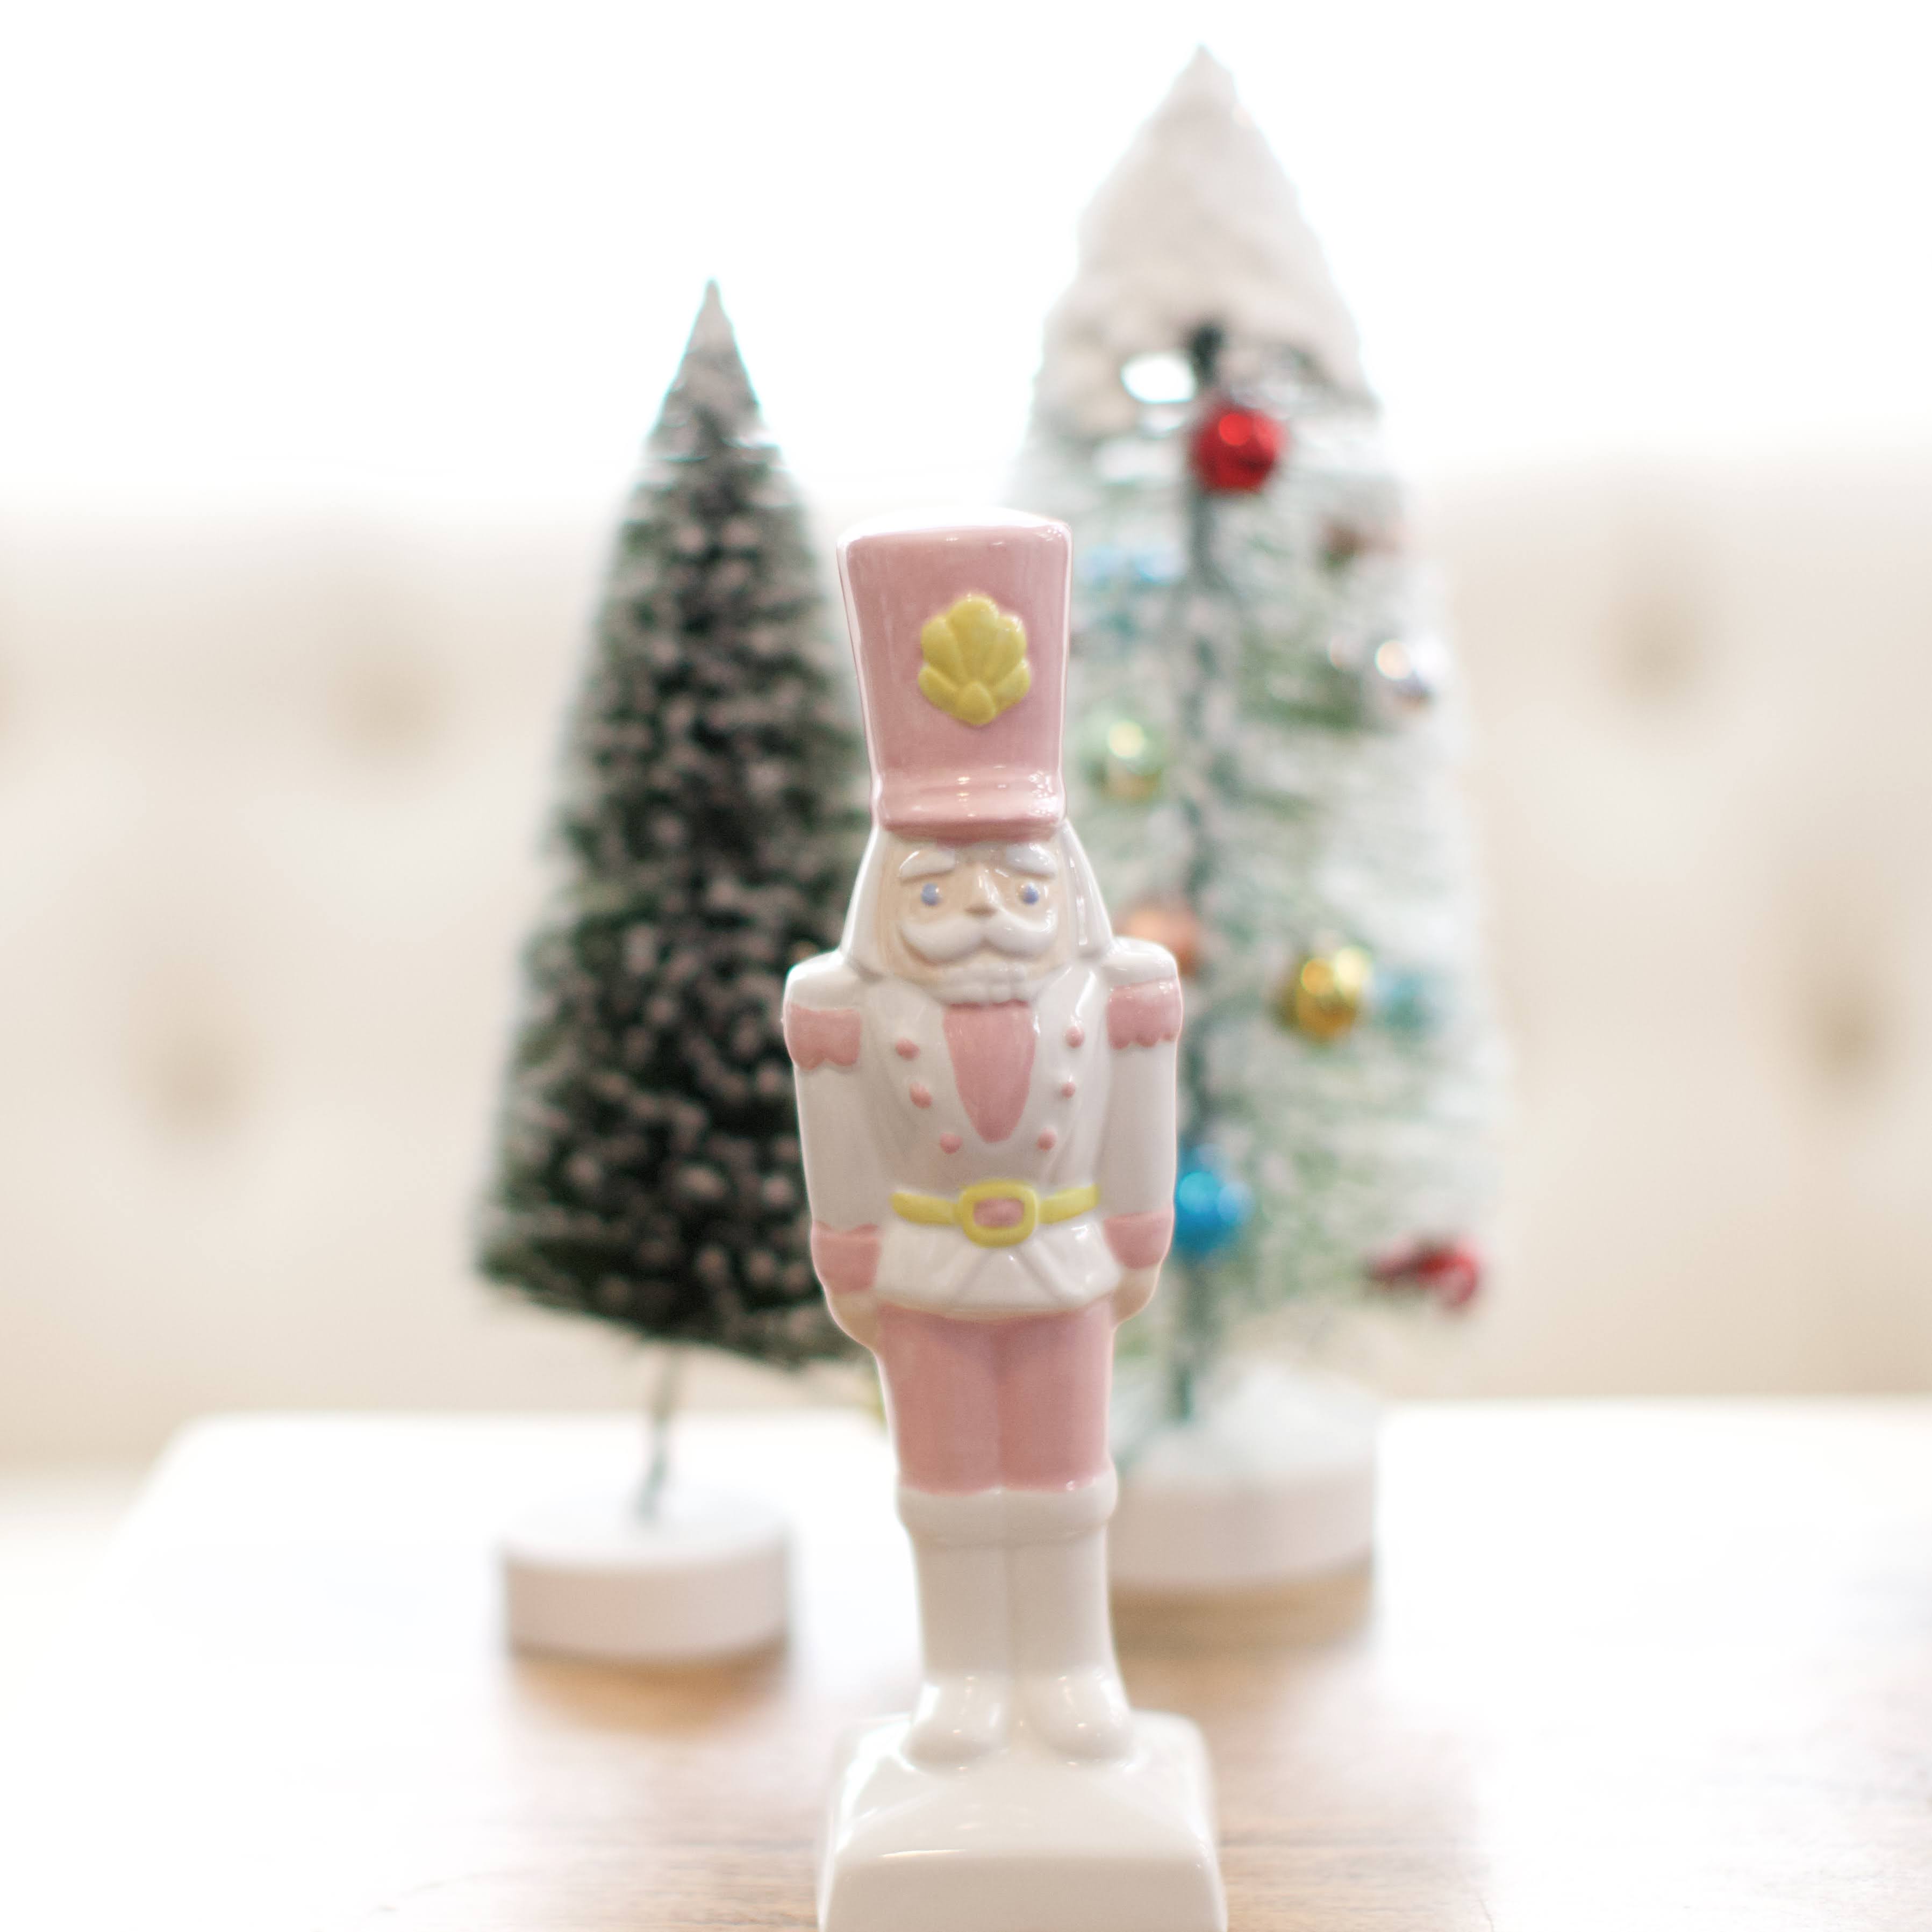 13 White and Pink Bow Light Ceramic Christmas Tree